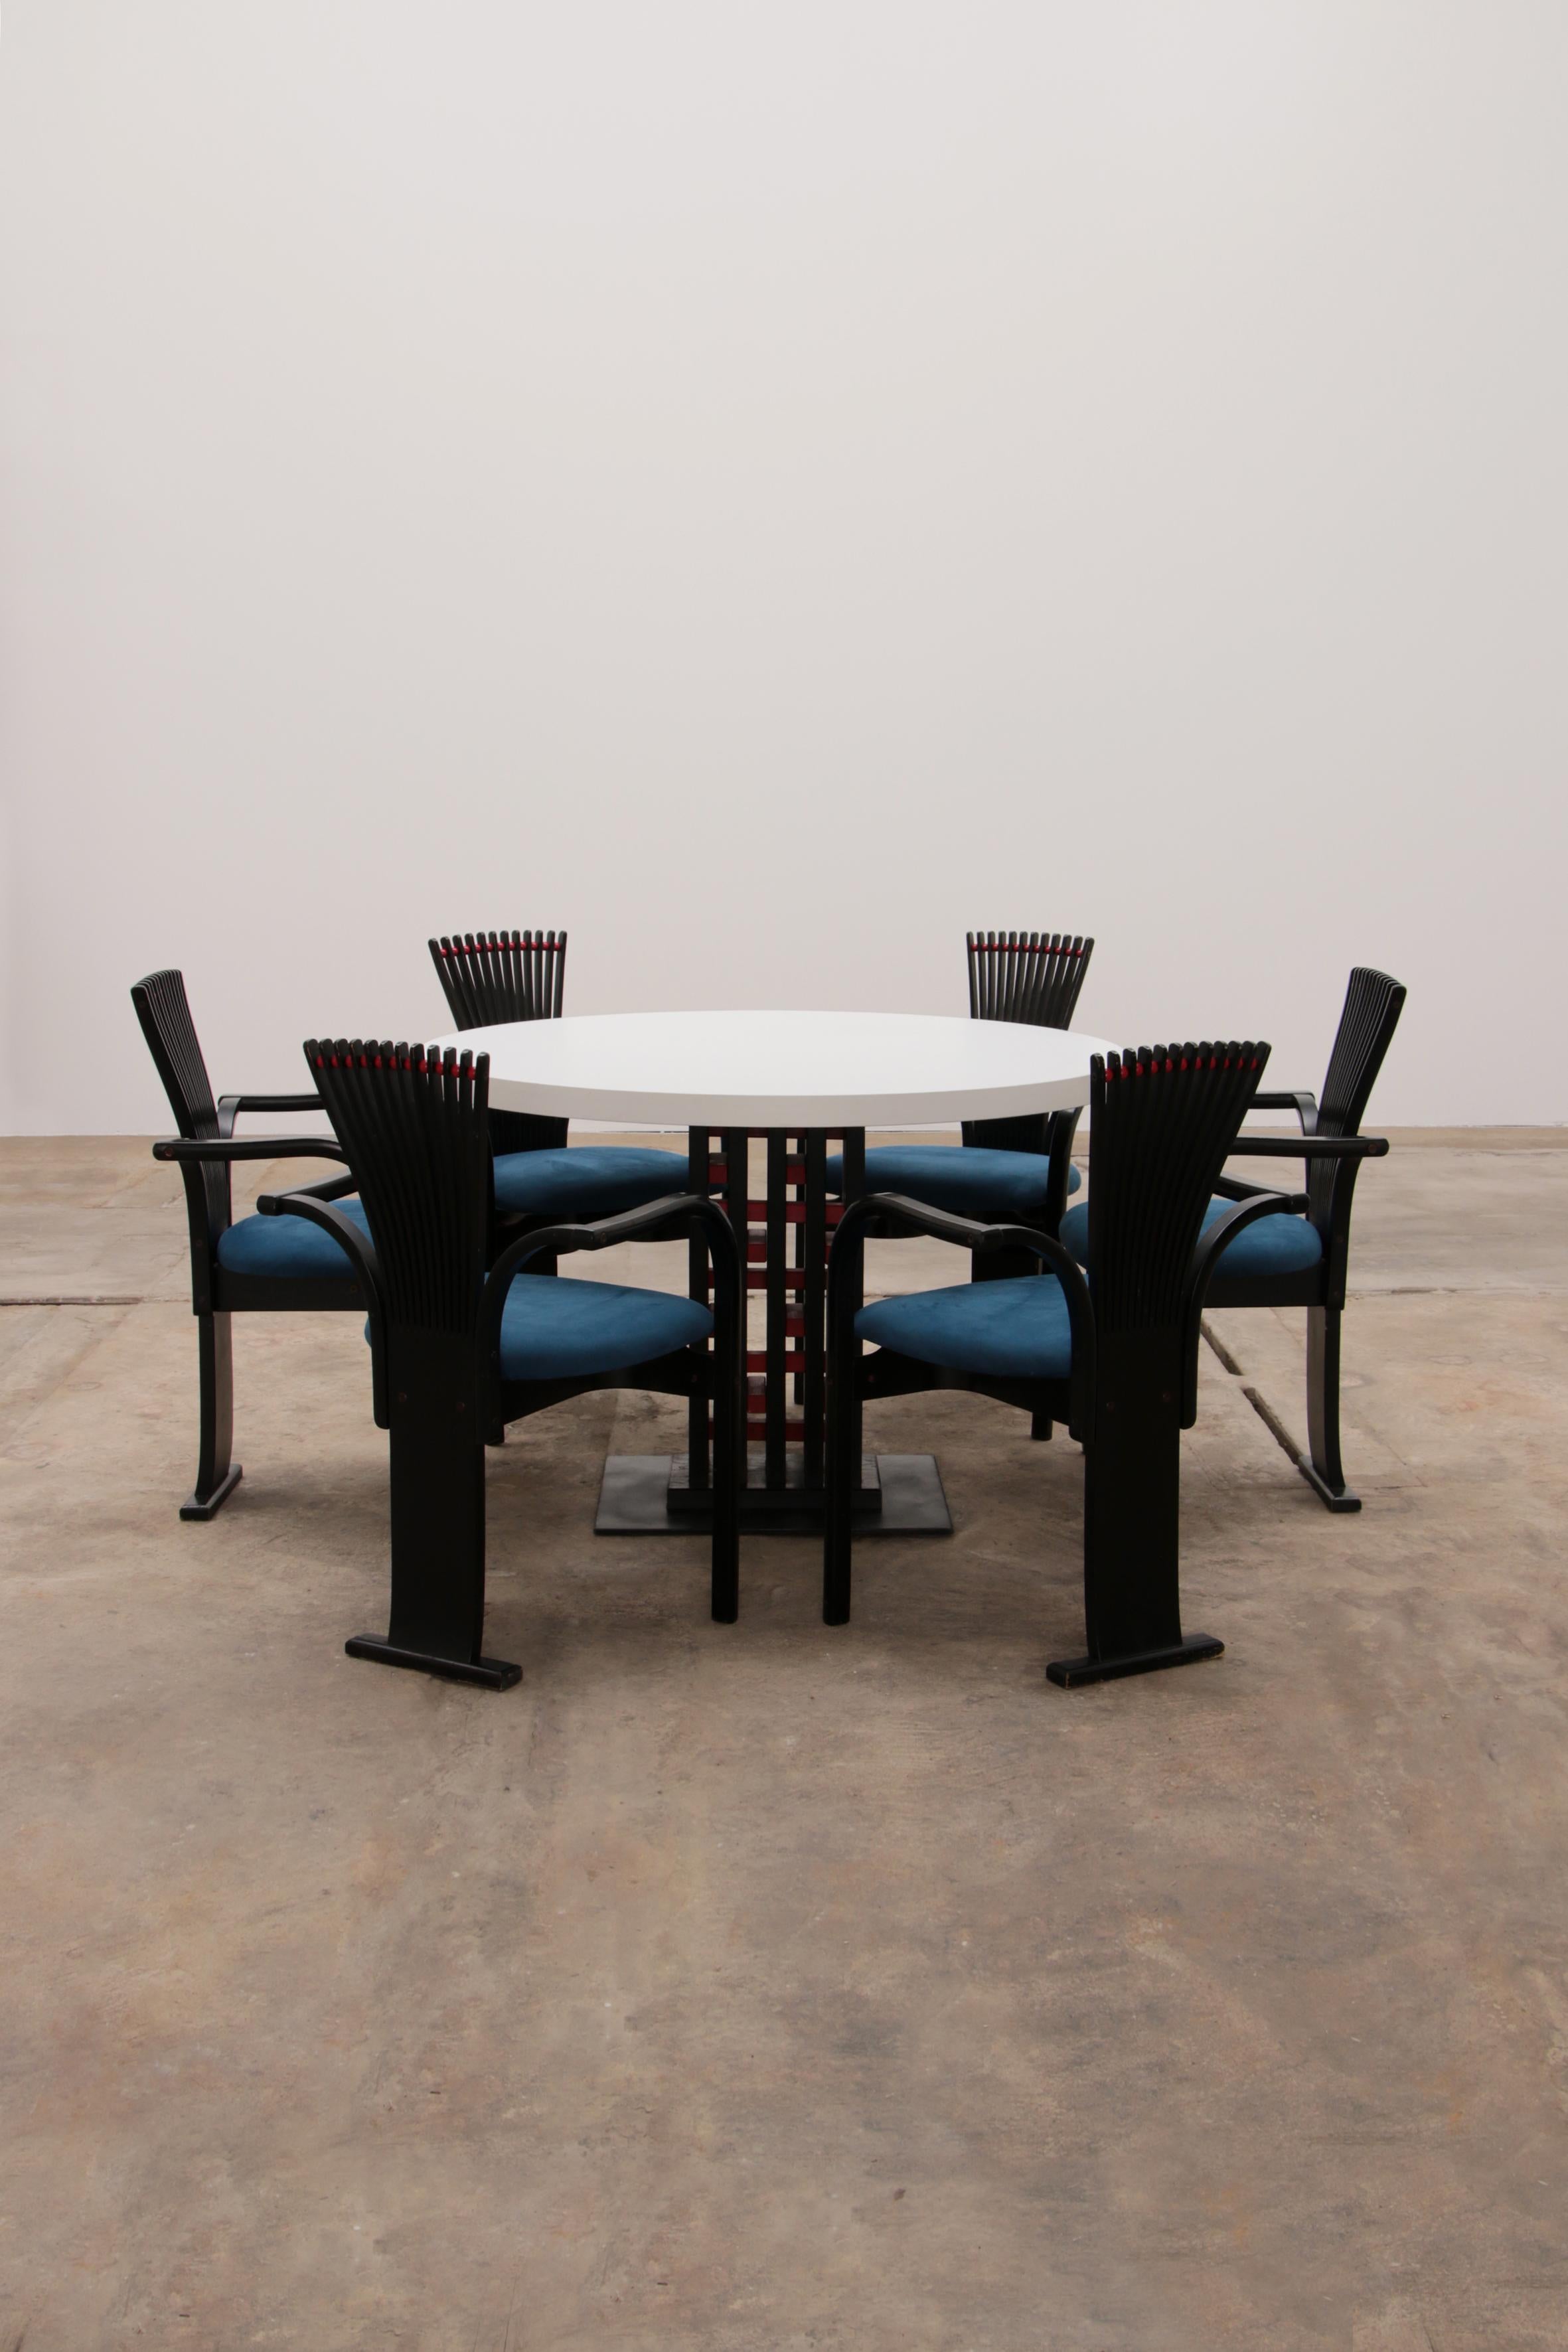 These vintage chairs were designed in Norway in 1984 by Torstein Nilsen for Westnofa.

This is a set of 6 dining room chairs with a round dinner table.

The chairs are of very luxurious and high quality and made of black oak. The individual legs